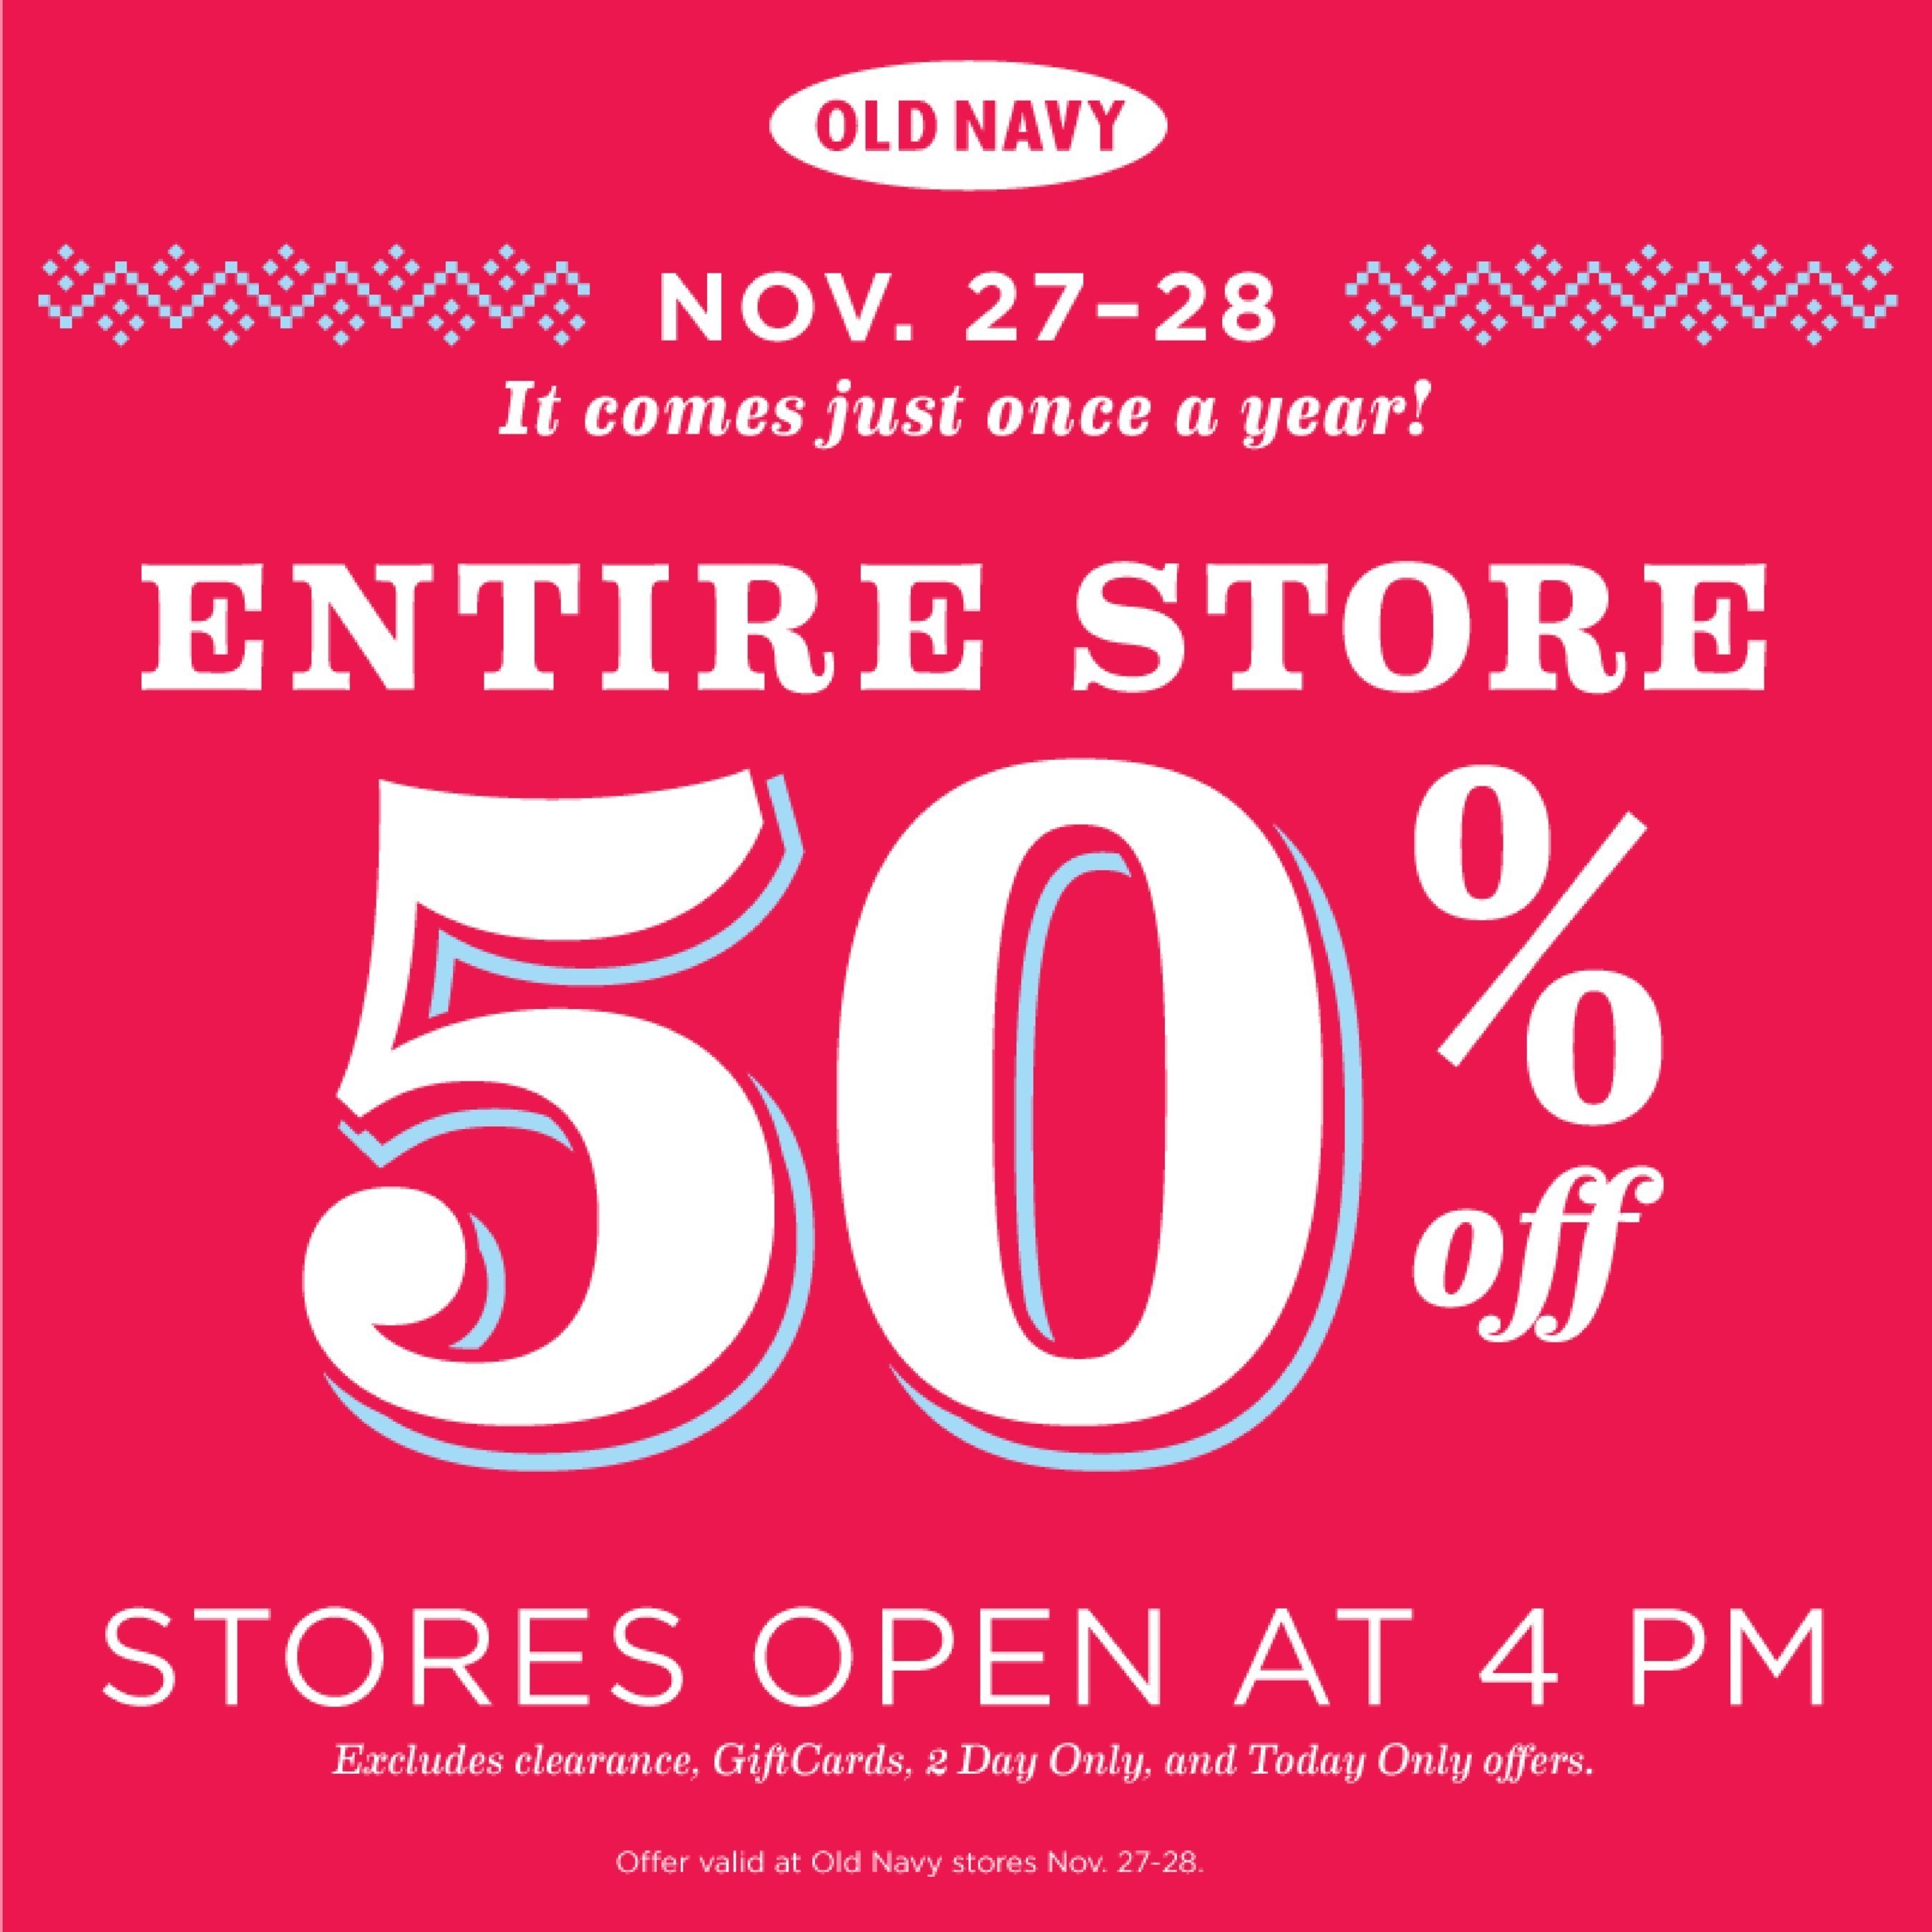 Old Navy Stores 50% off on Black Friday